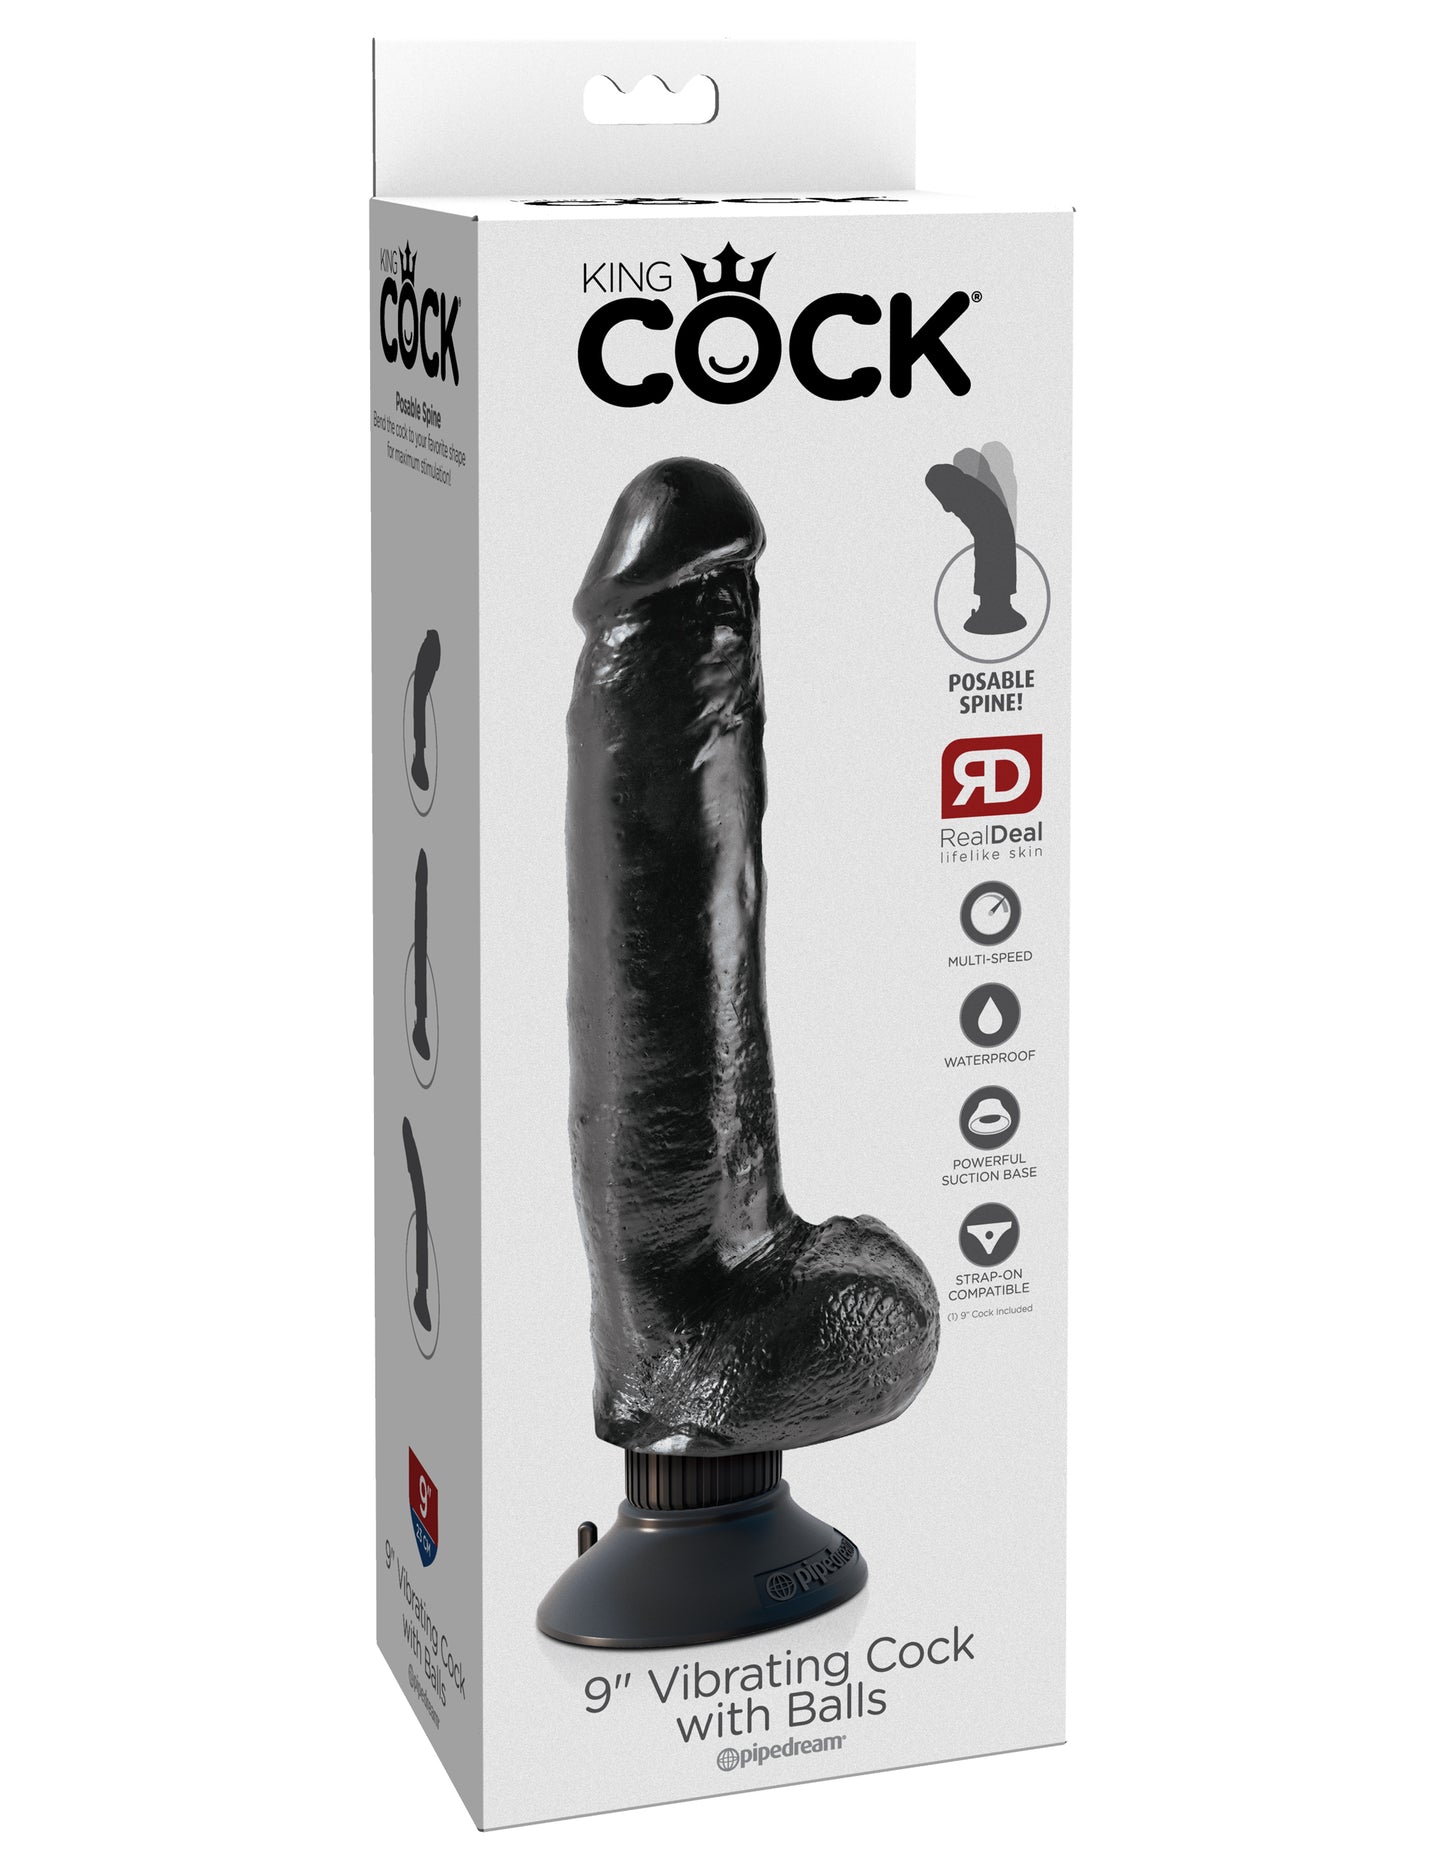 King Cock 9-Inch Vibrating Cock With Balls - Black PD5408-23